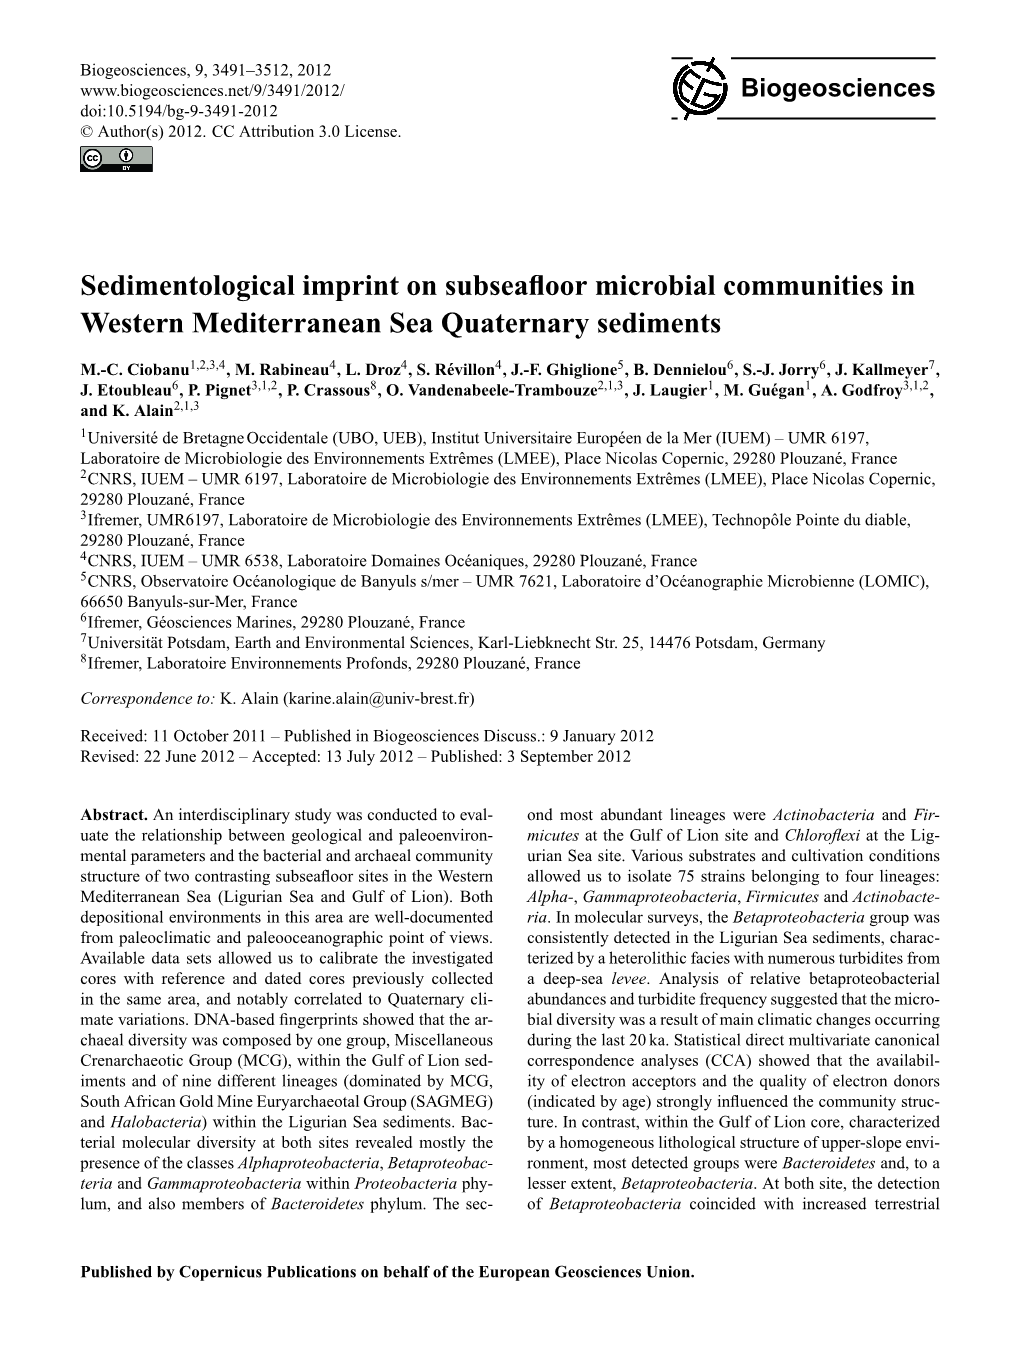 Sedimentological Imprint on Subseafloor Microbial Communities